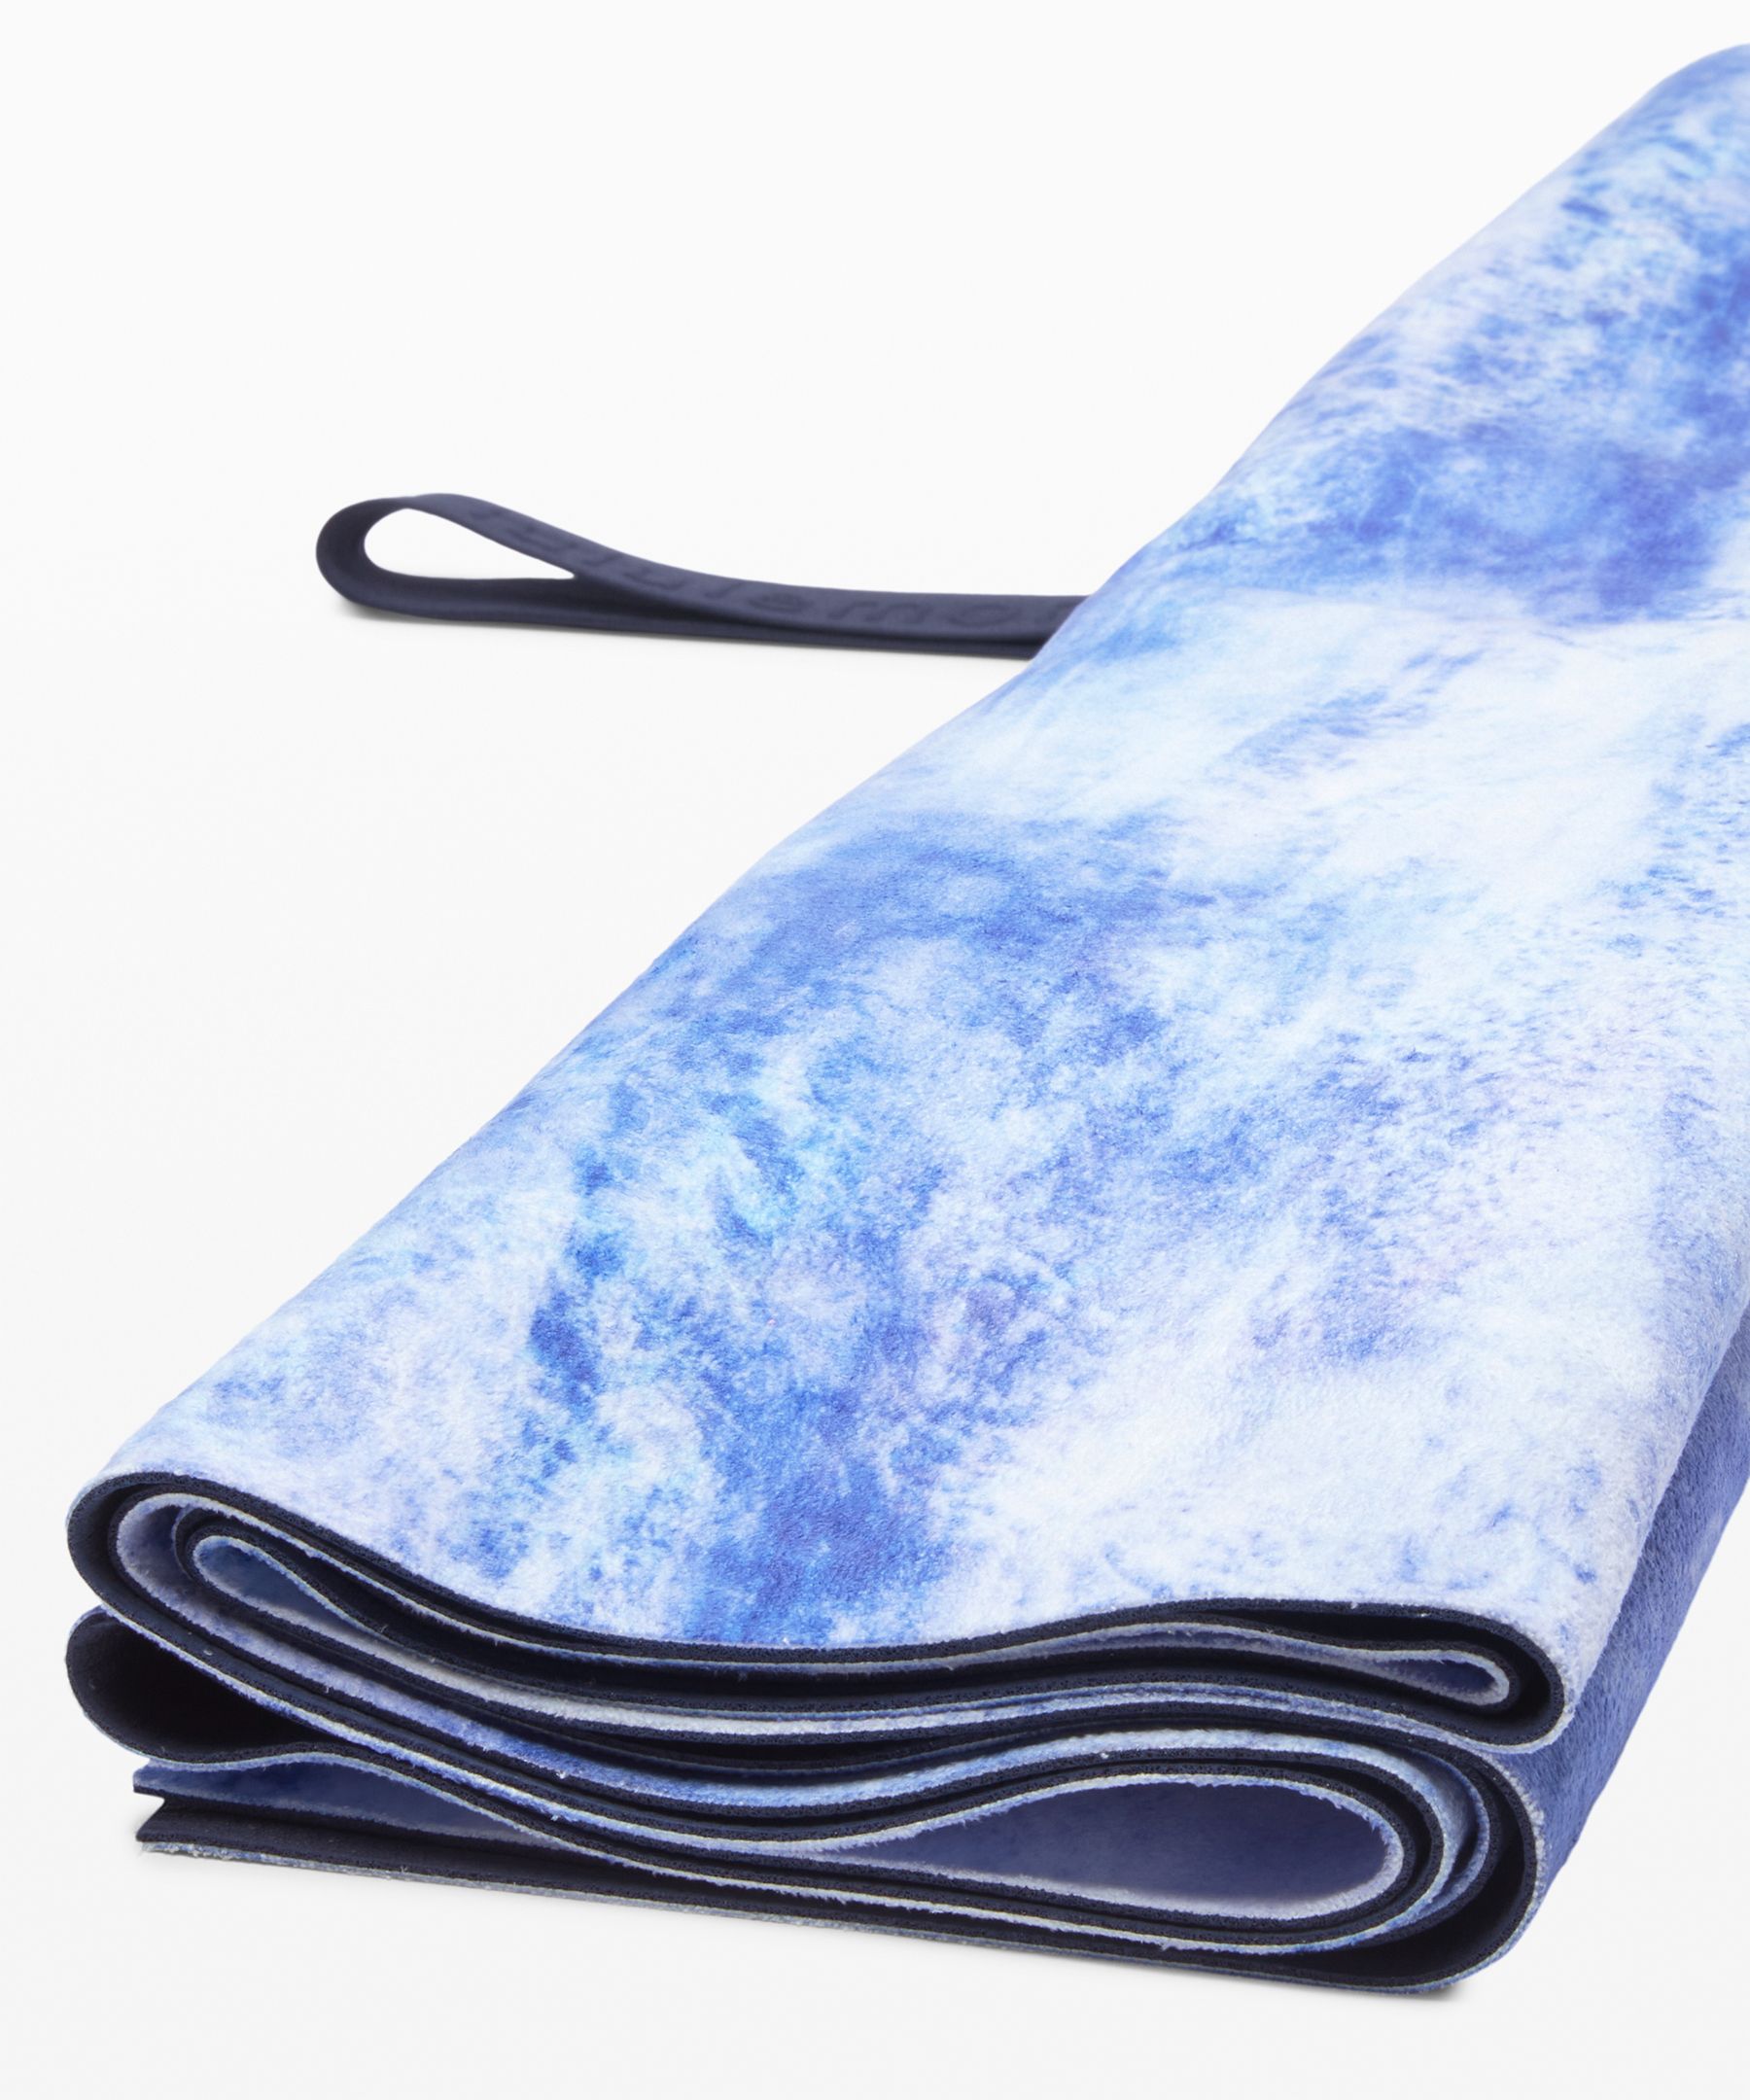 Carry Onwards Travel Yoga Mat 2mm *Made With FSC Certified Rubber